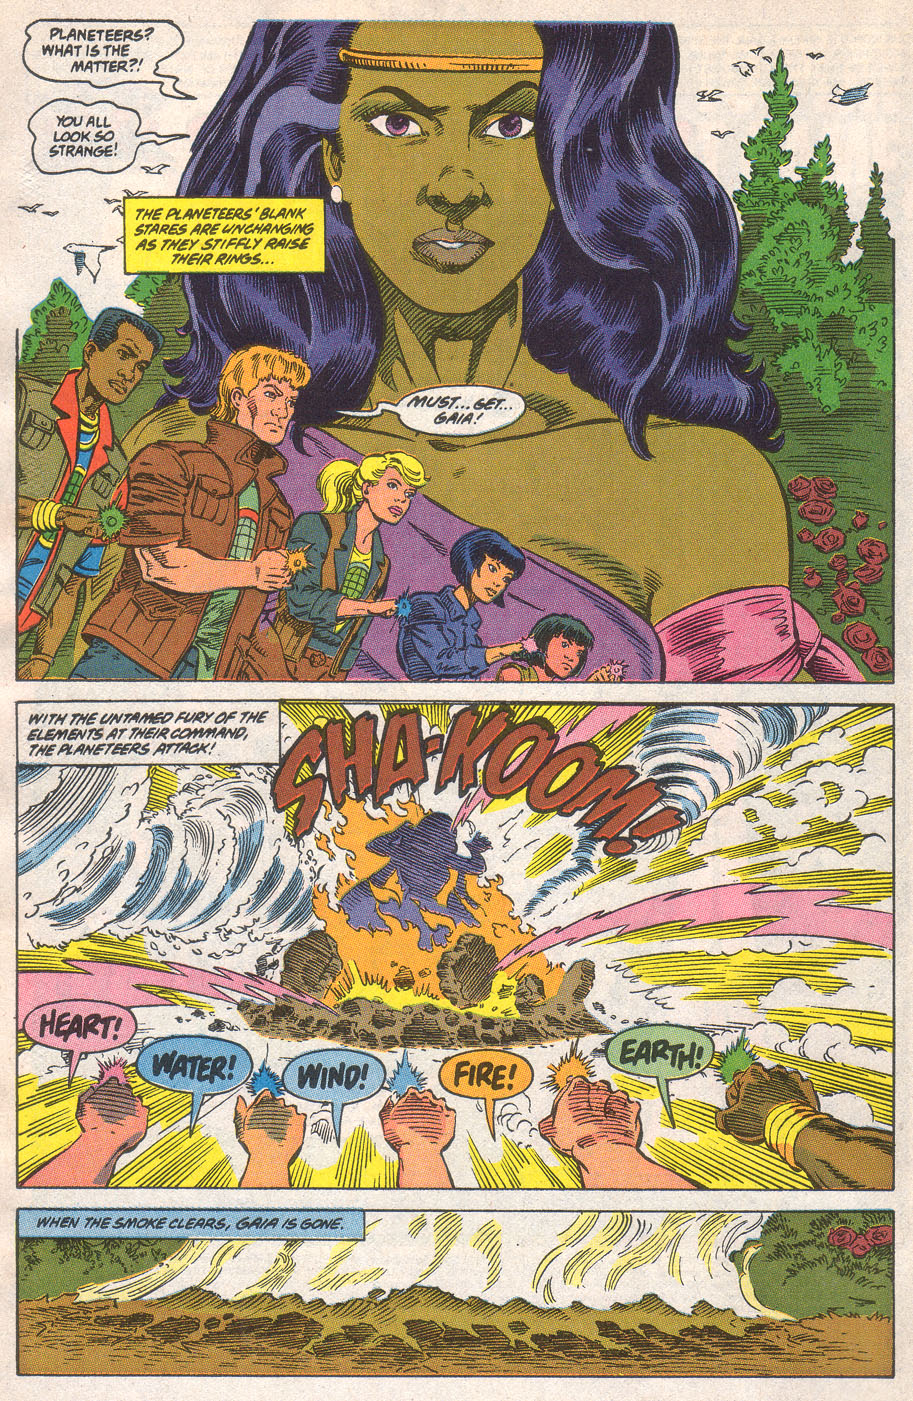 Captain Planet And The Planeteers Issue 7 | Read Captain Planet And The  Planeteers Issue 7 comic online in high quality. Read Full Comic online for  free - Read comics online in high quality .